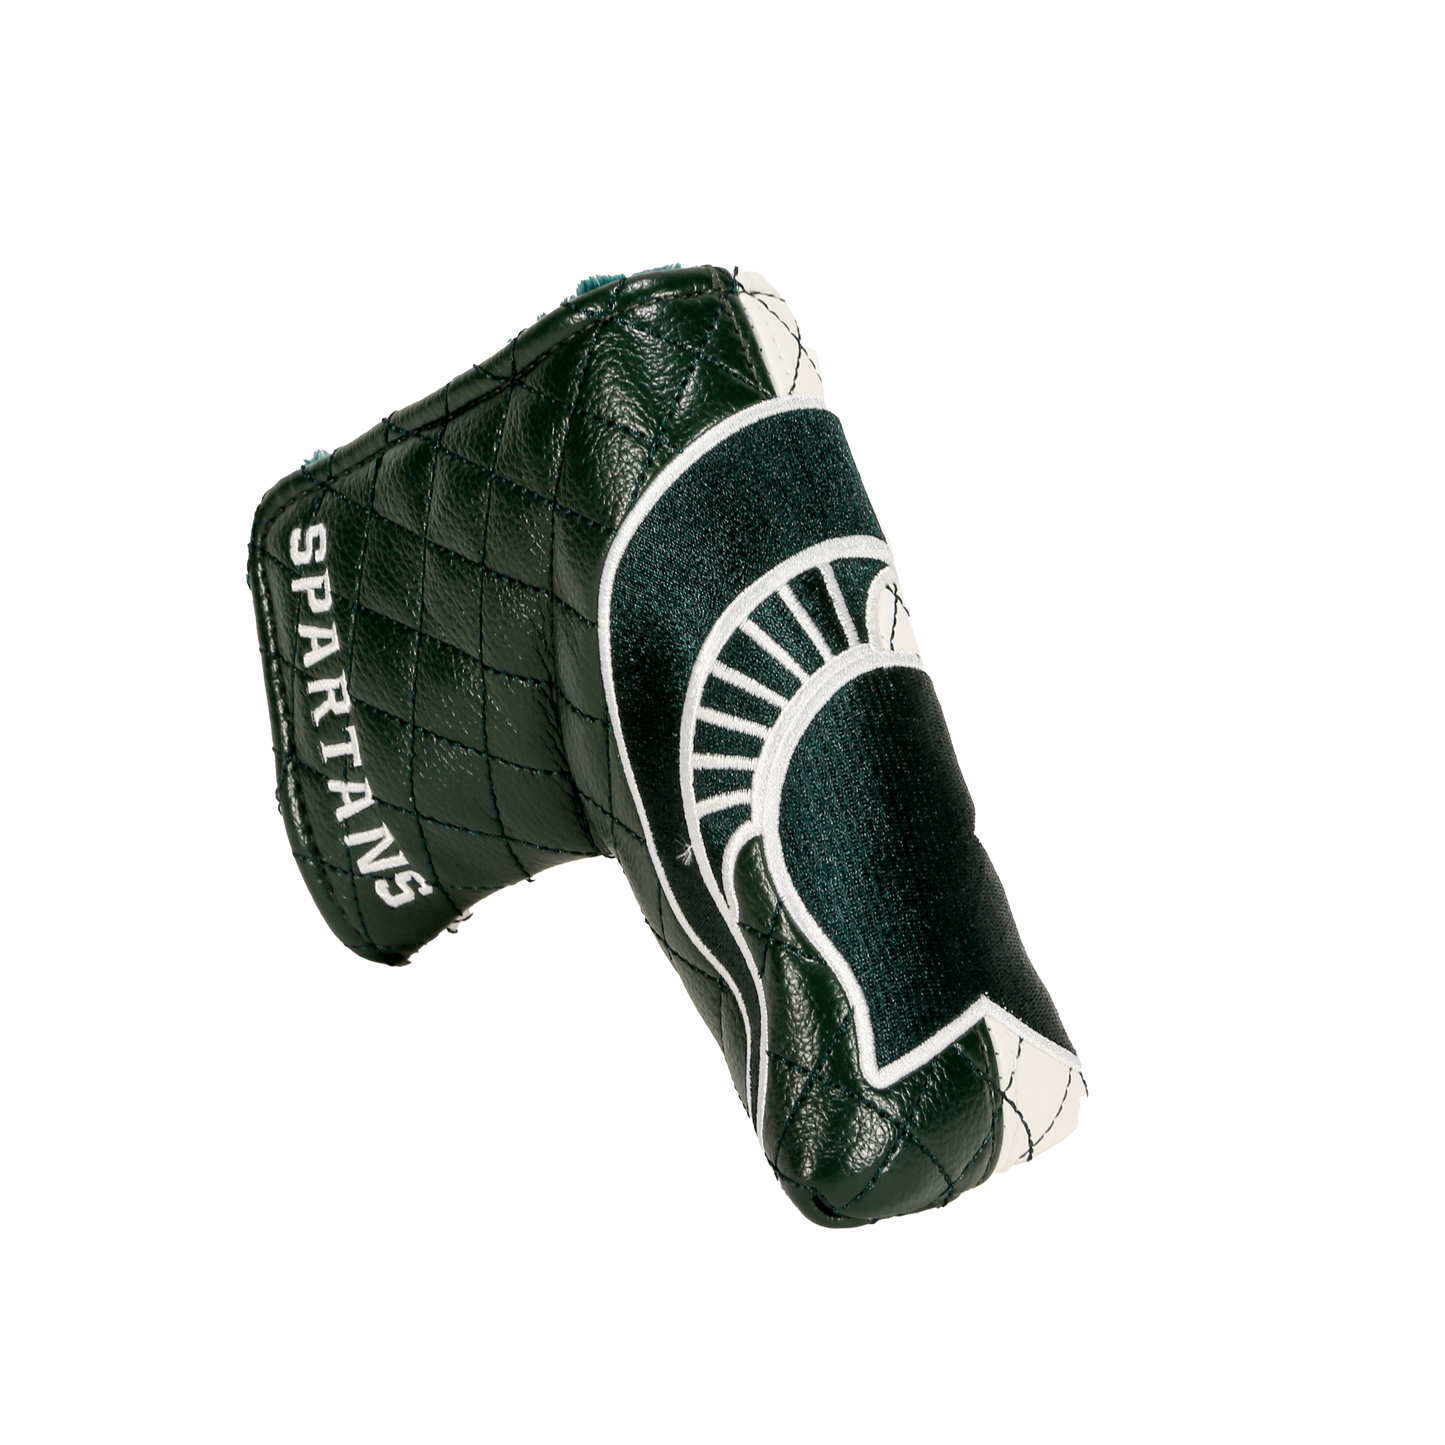 Michigan St. "Spartans" Blade Putter Cover